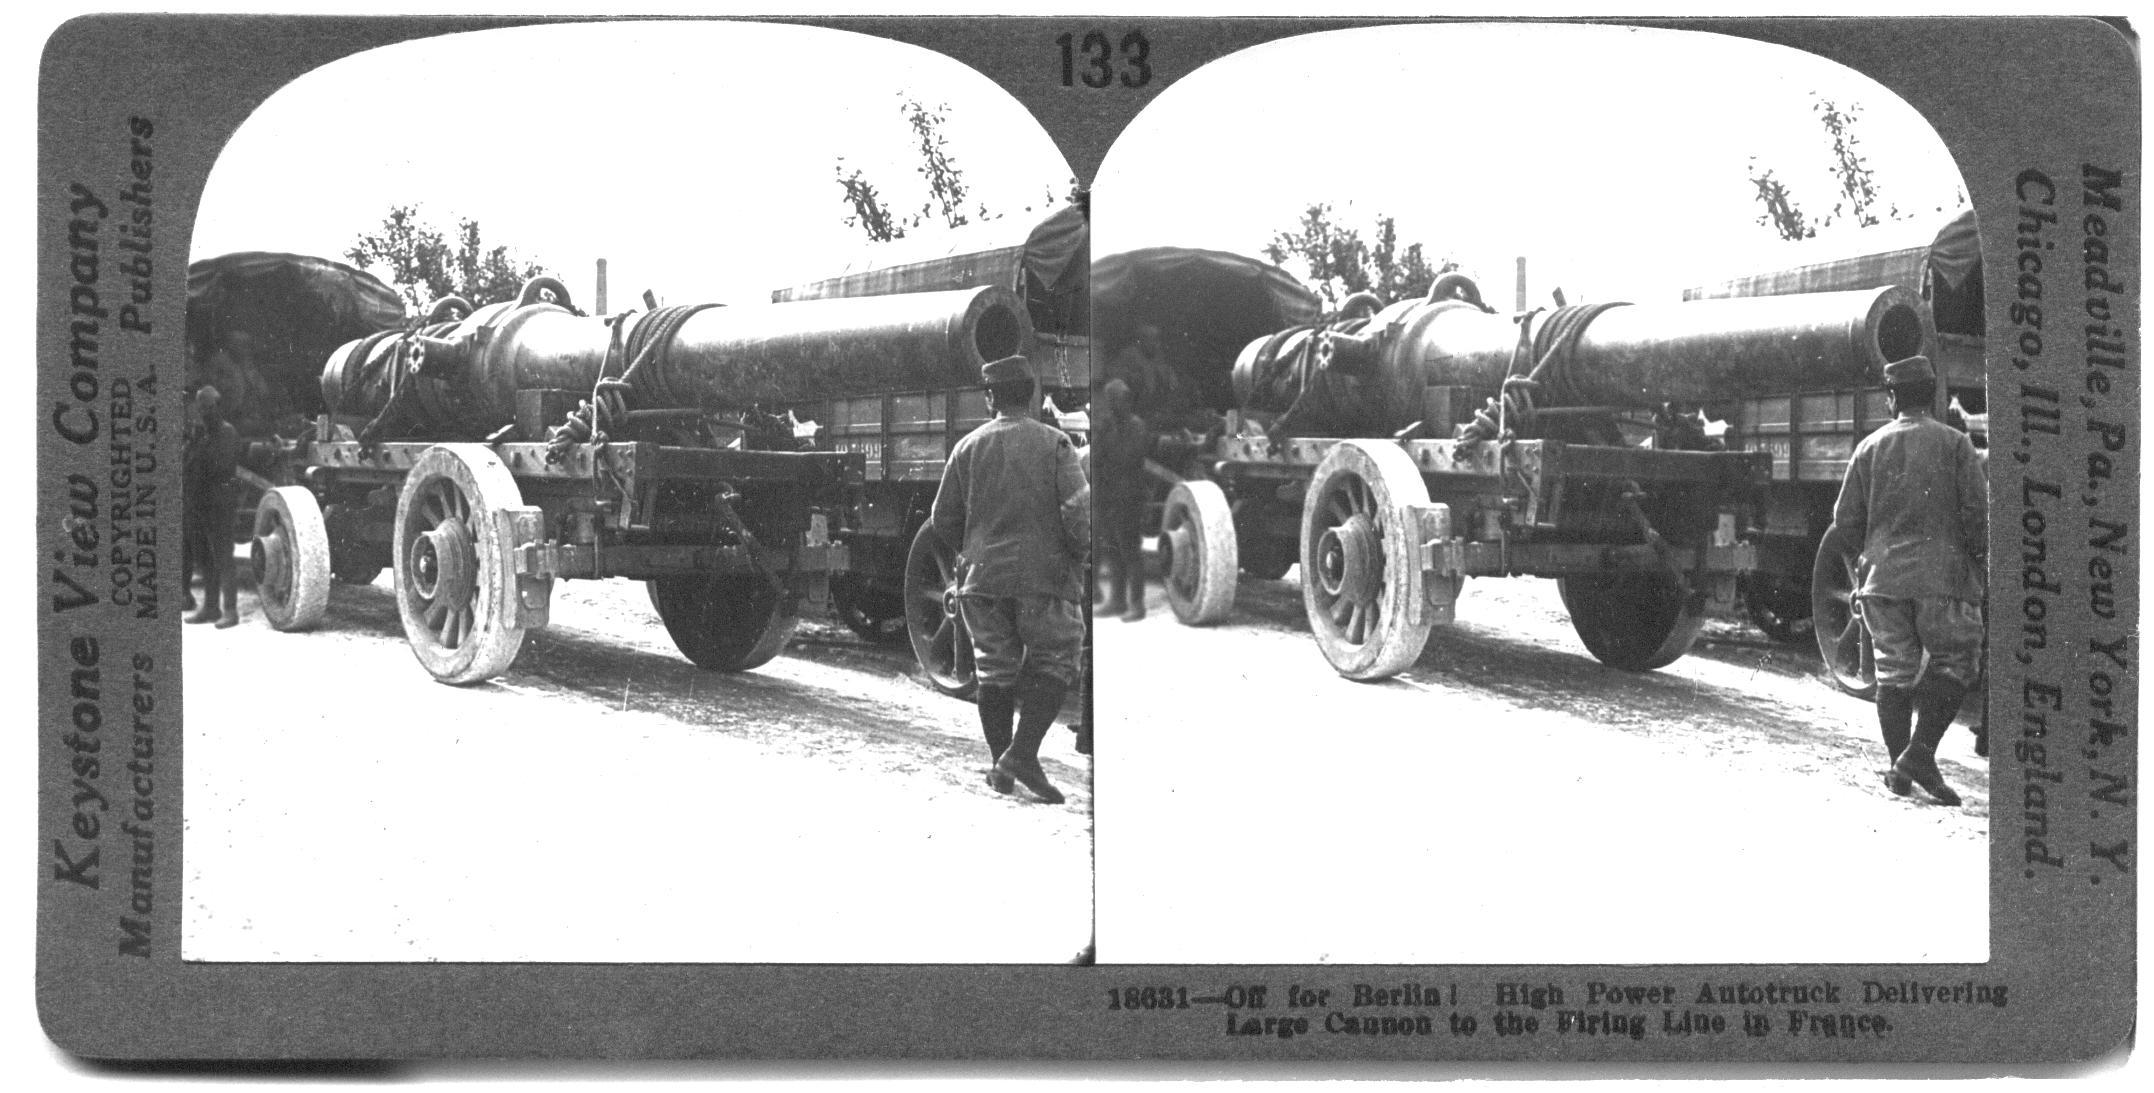 Off for Berlin! High Power Autotruck Delivering Large Cannon to the Firing Line in France